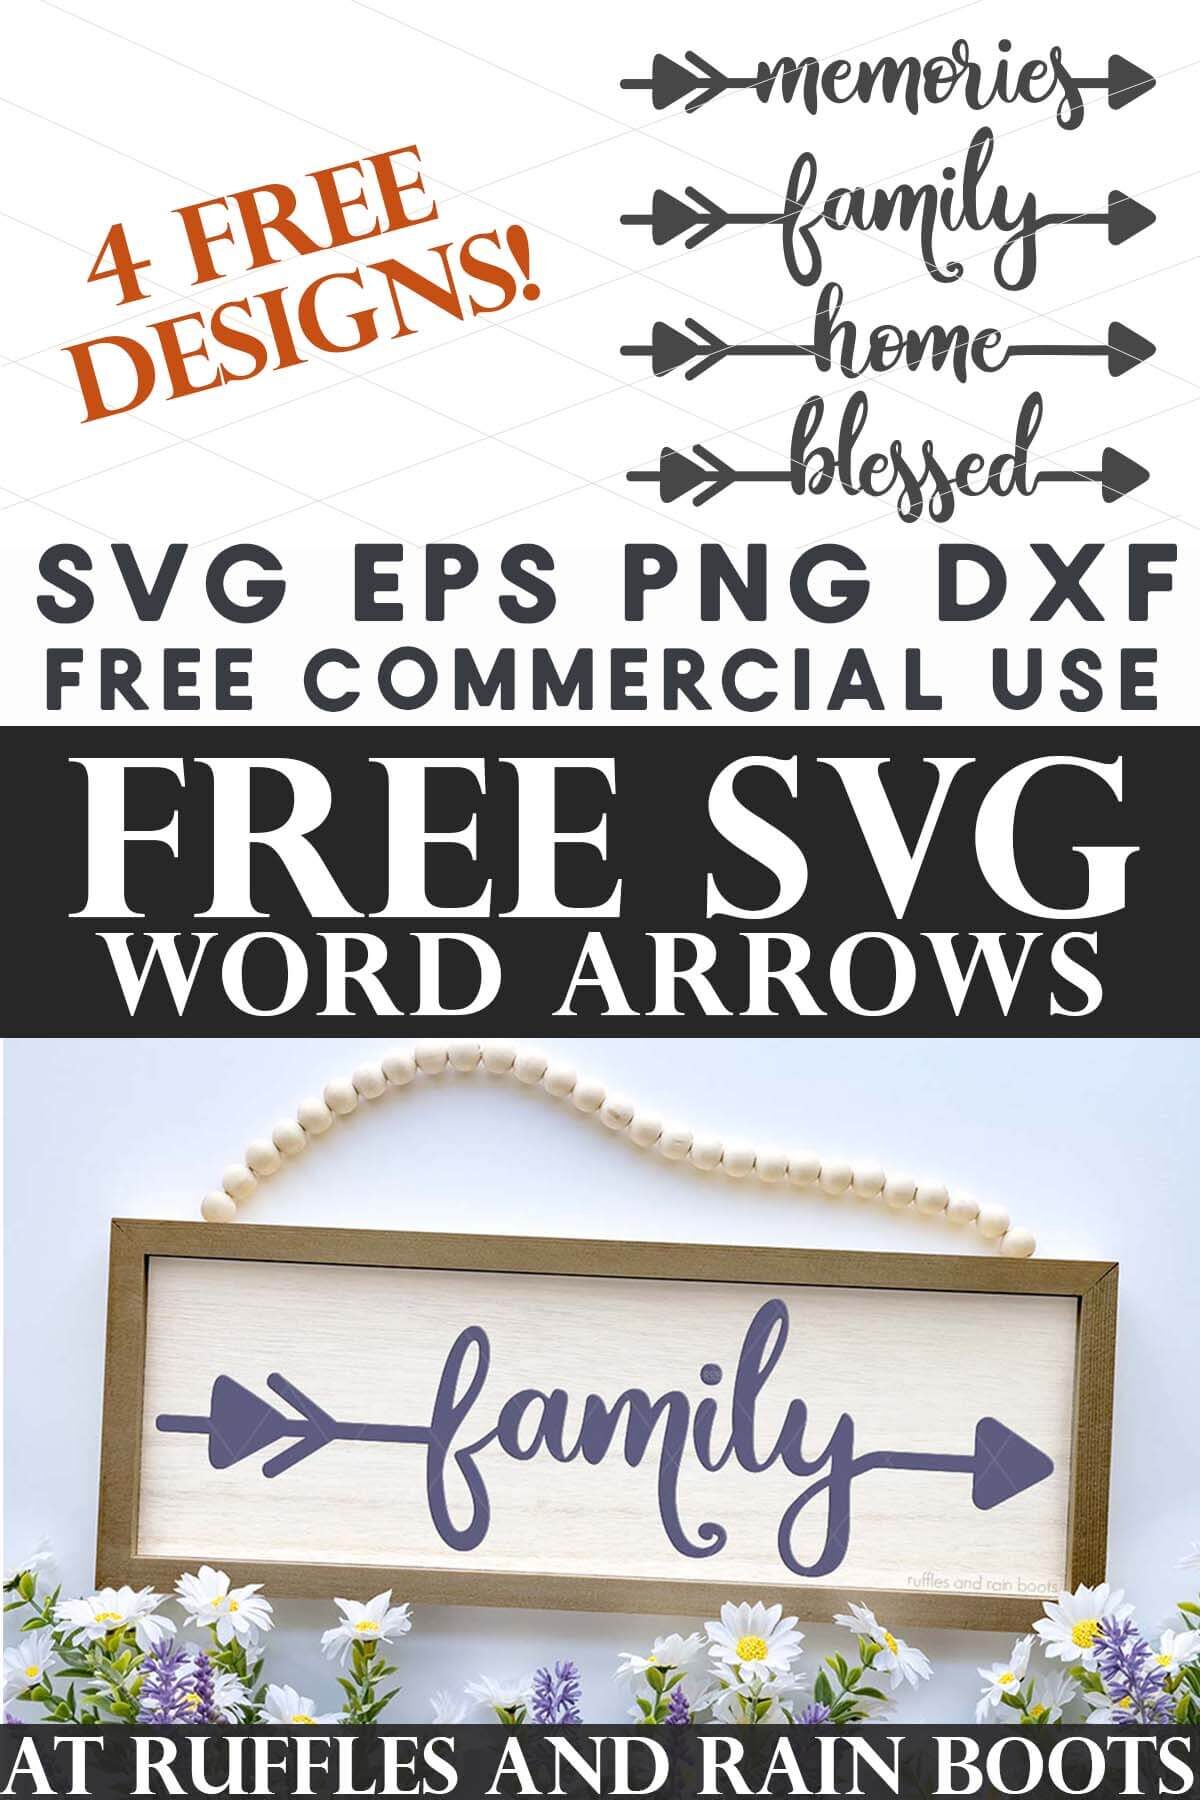 Split image showing four free word arrow SVG designs and family sign made with vinyl.